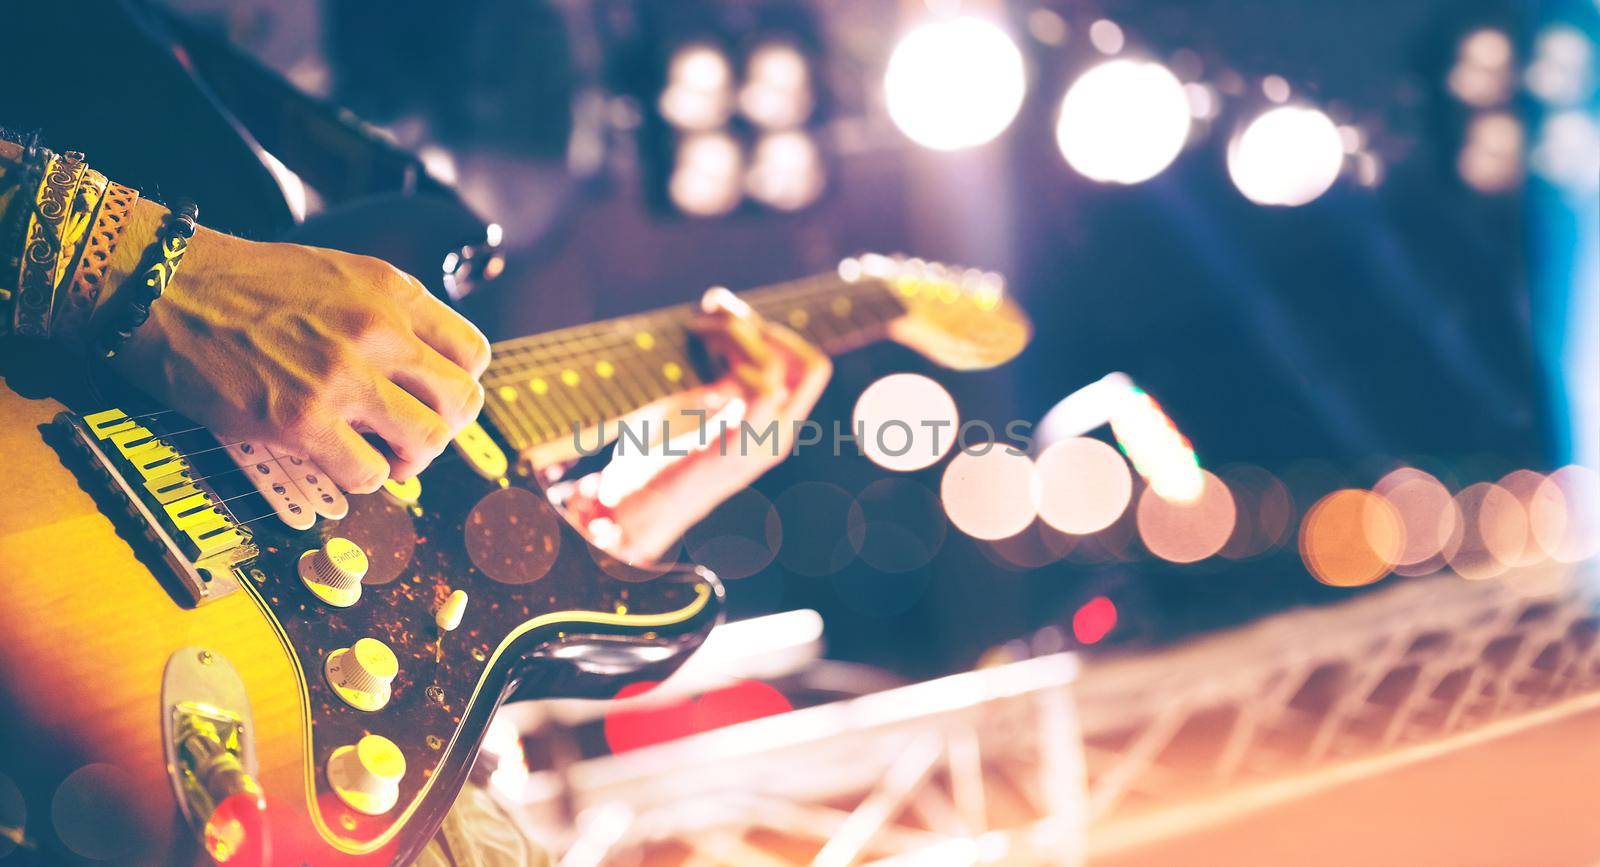 Stage lights.Abstract musical background.Playing guitar and concert concept by carloscastilla